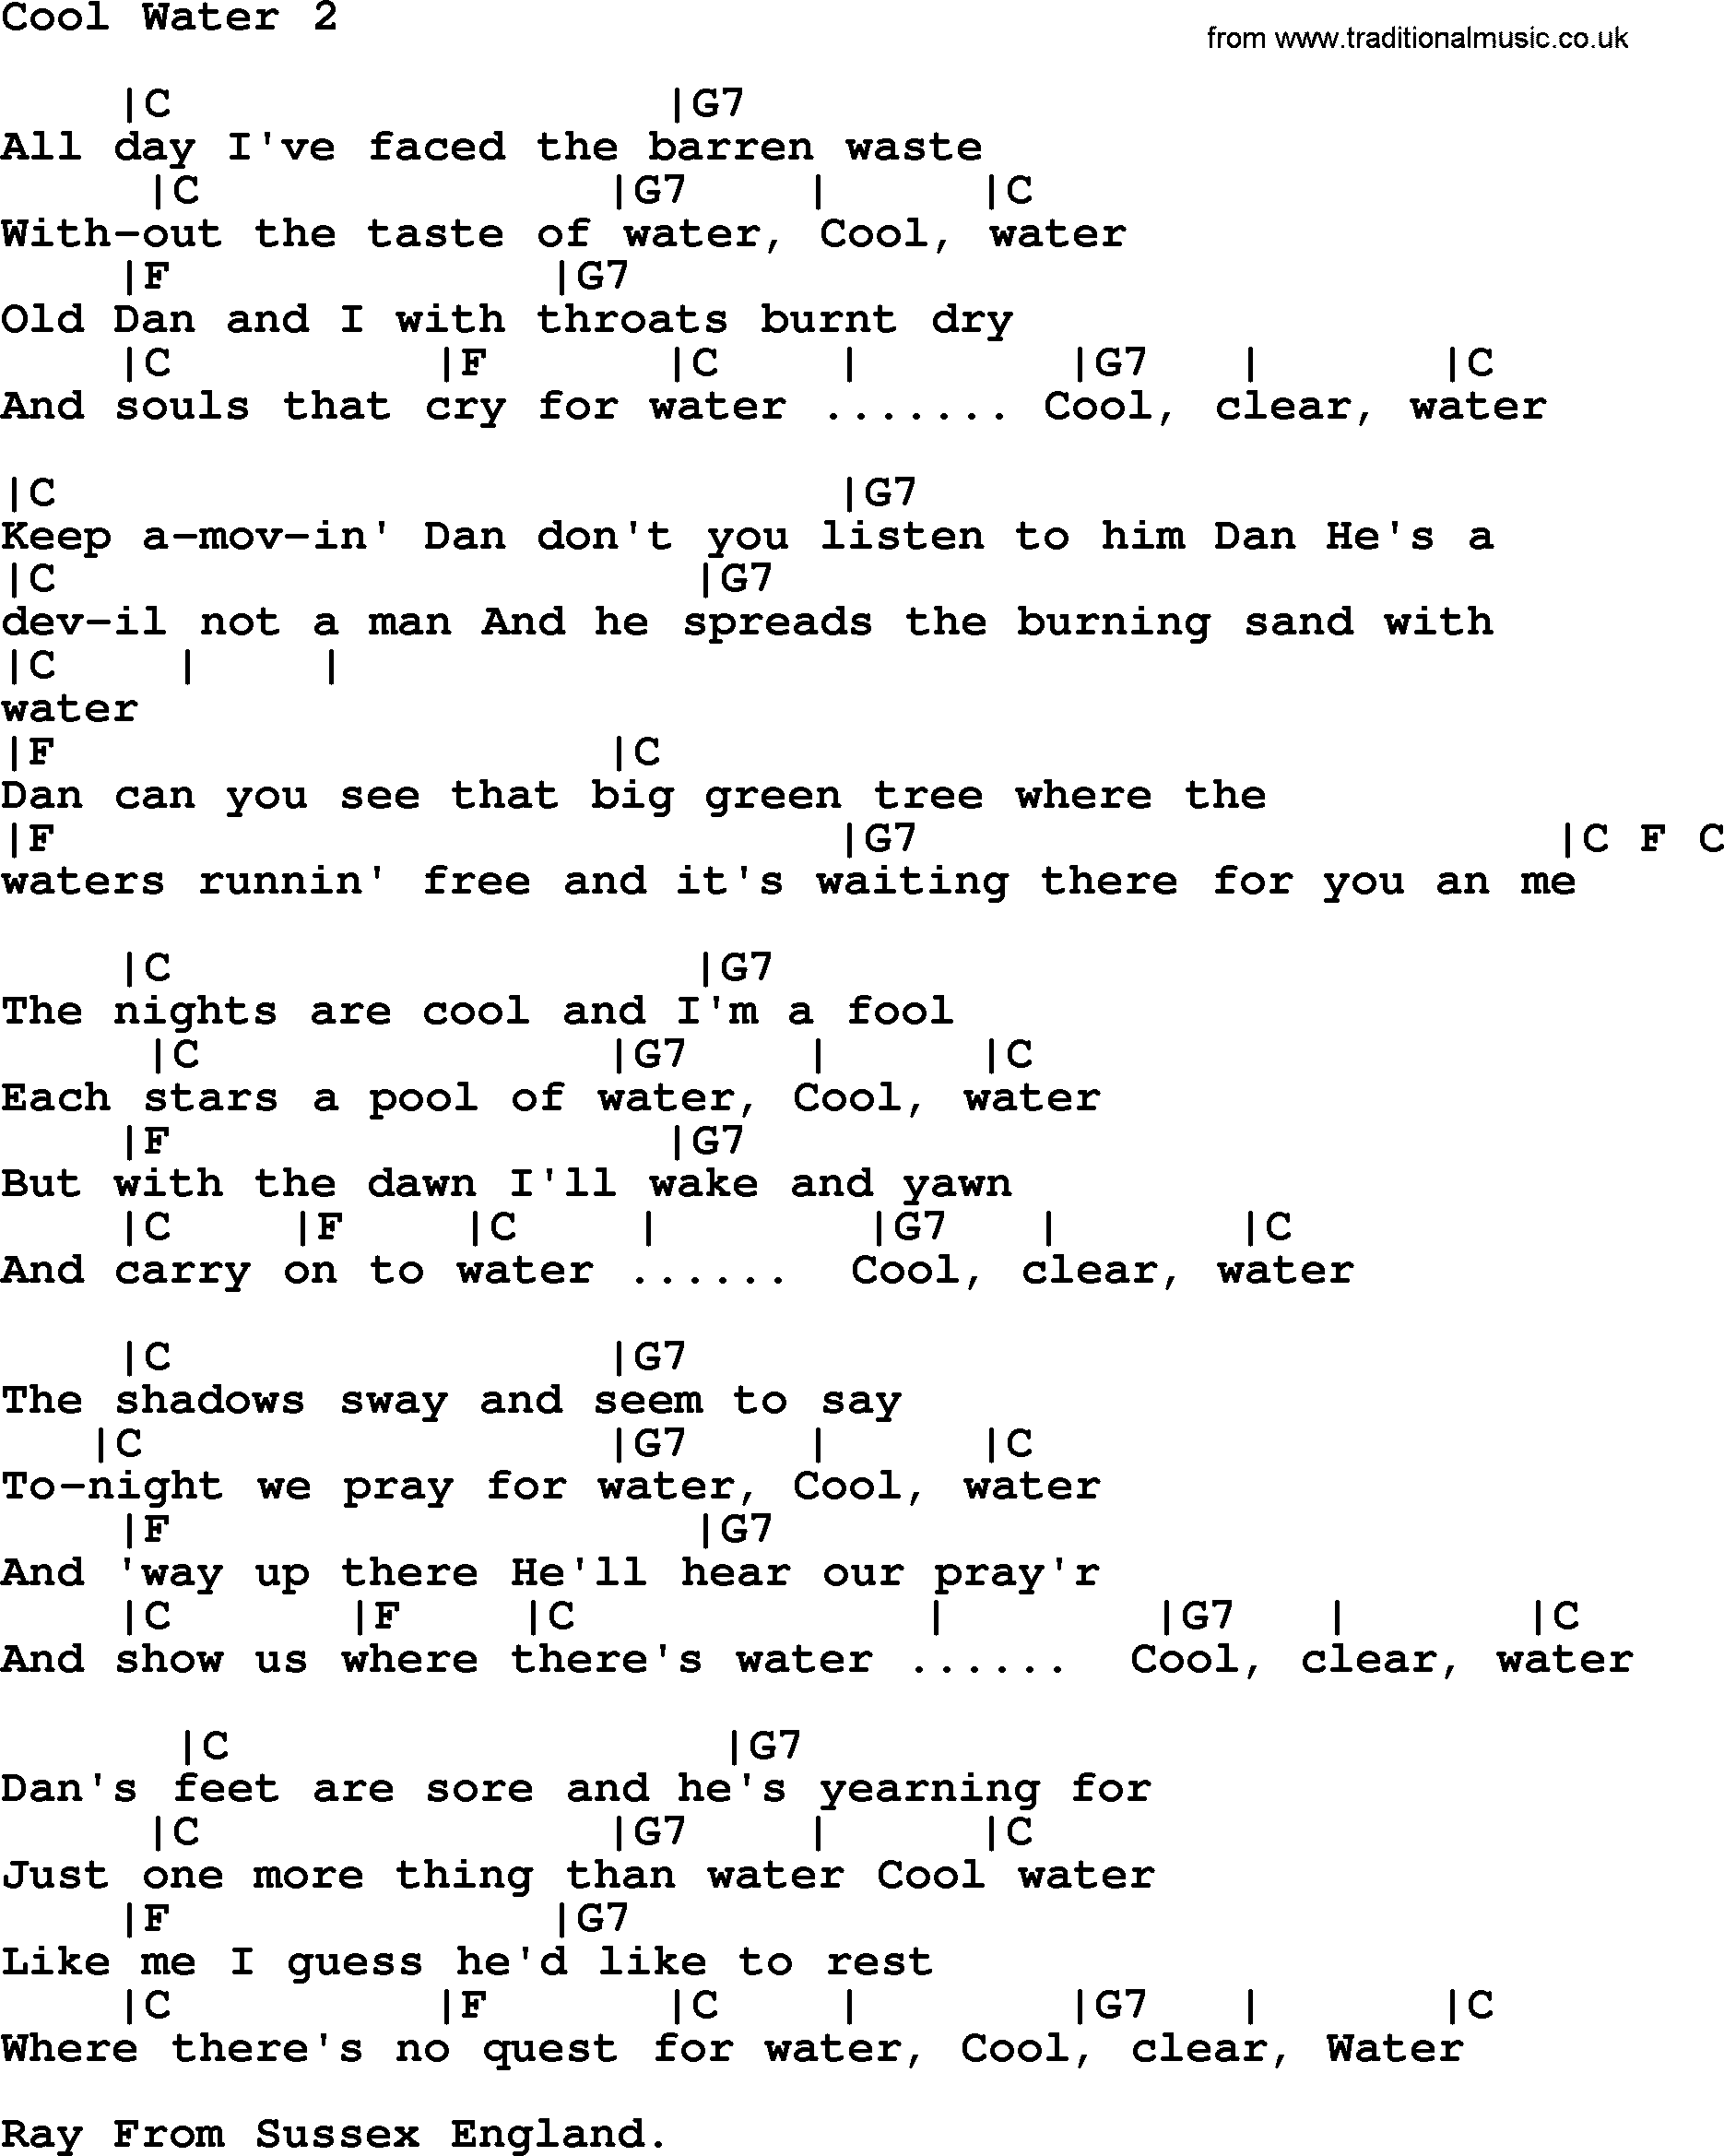 Bluegrass song: Cool Water 2, lyrics and chords